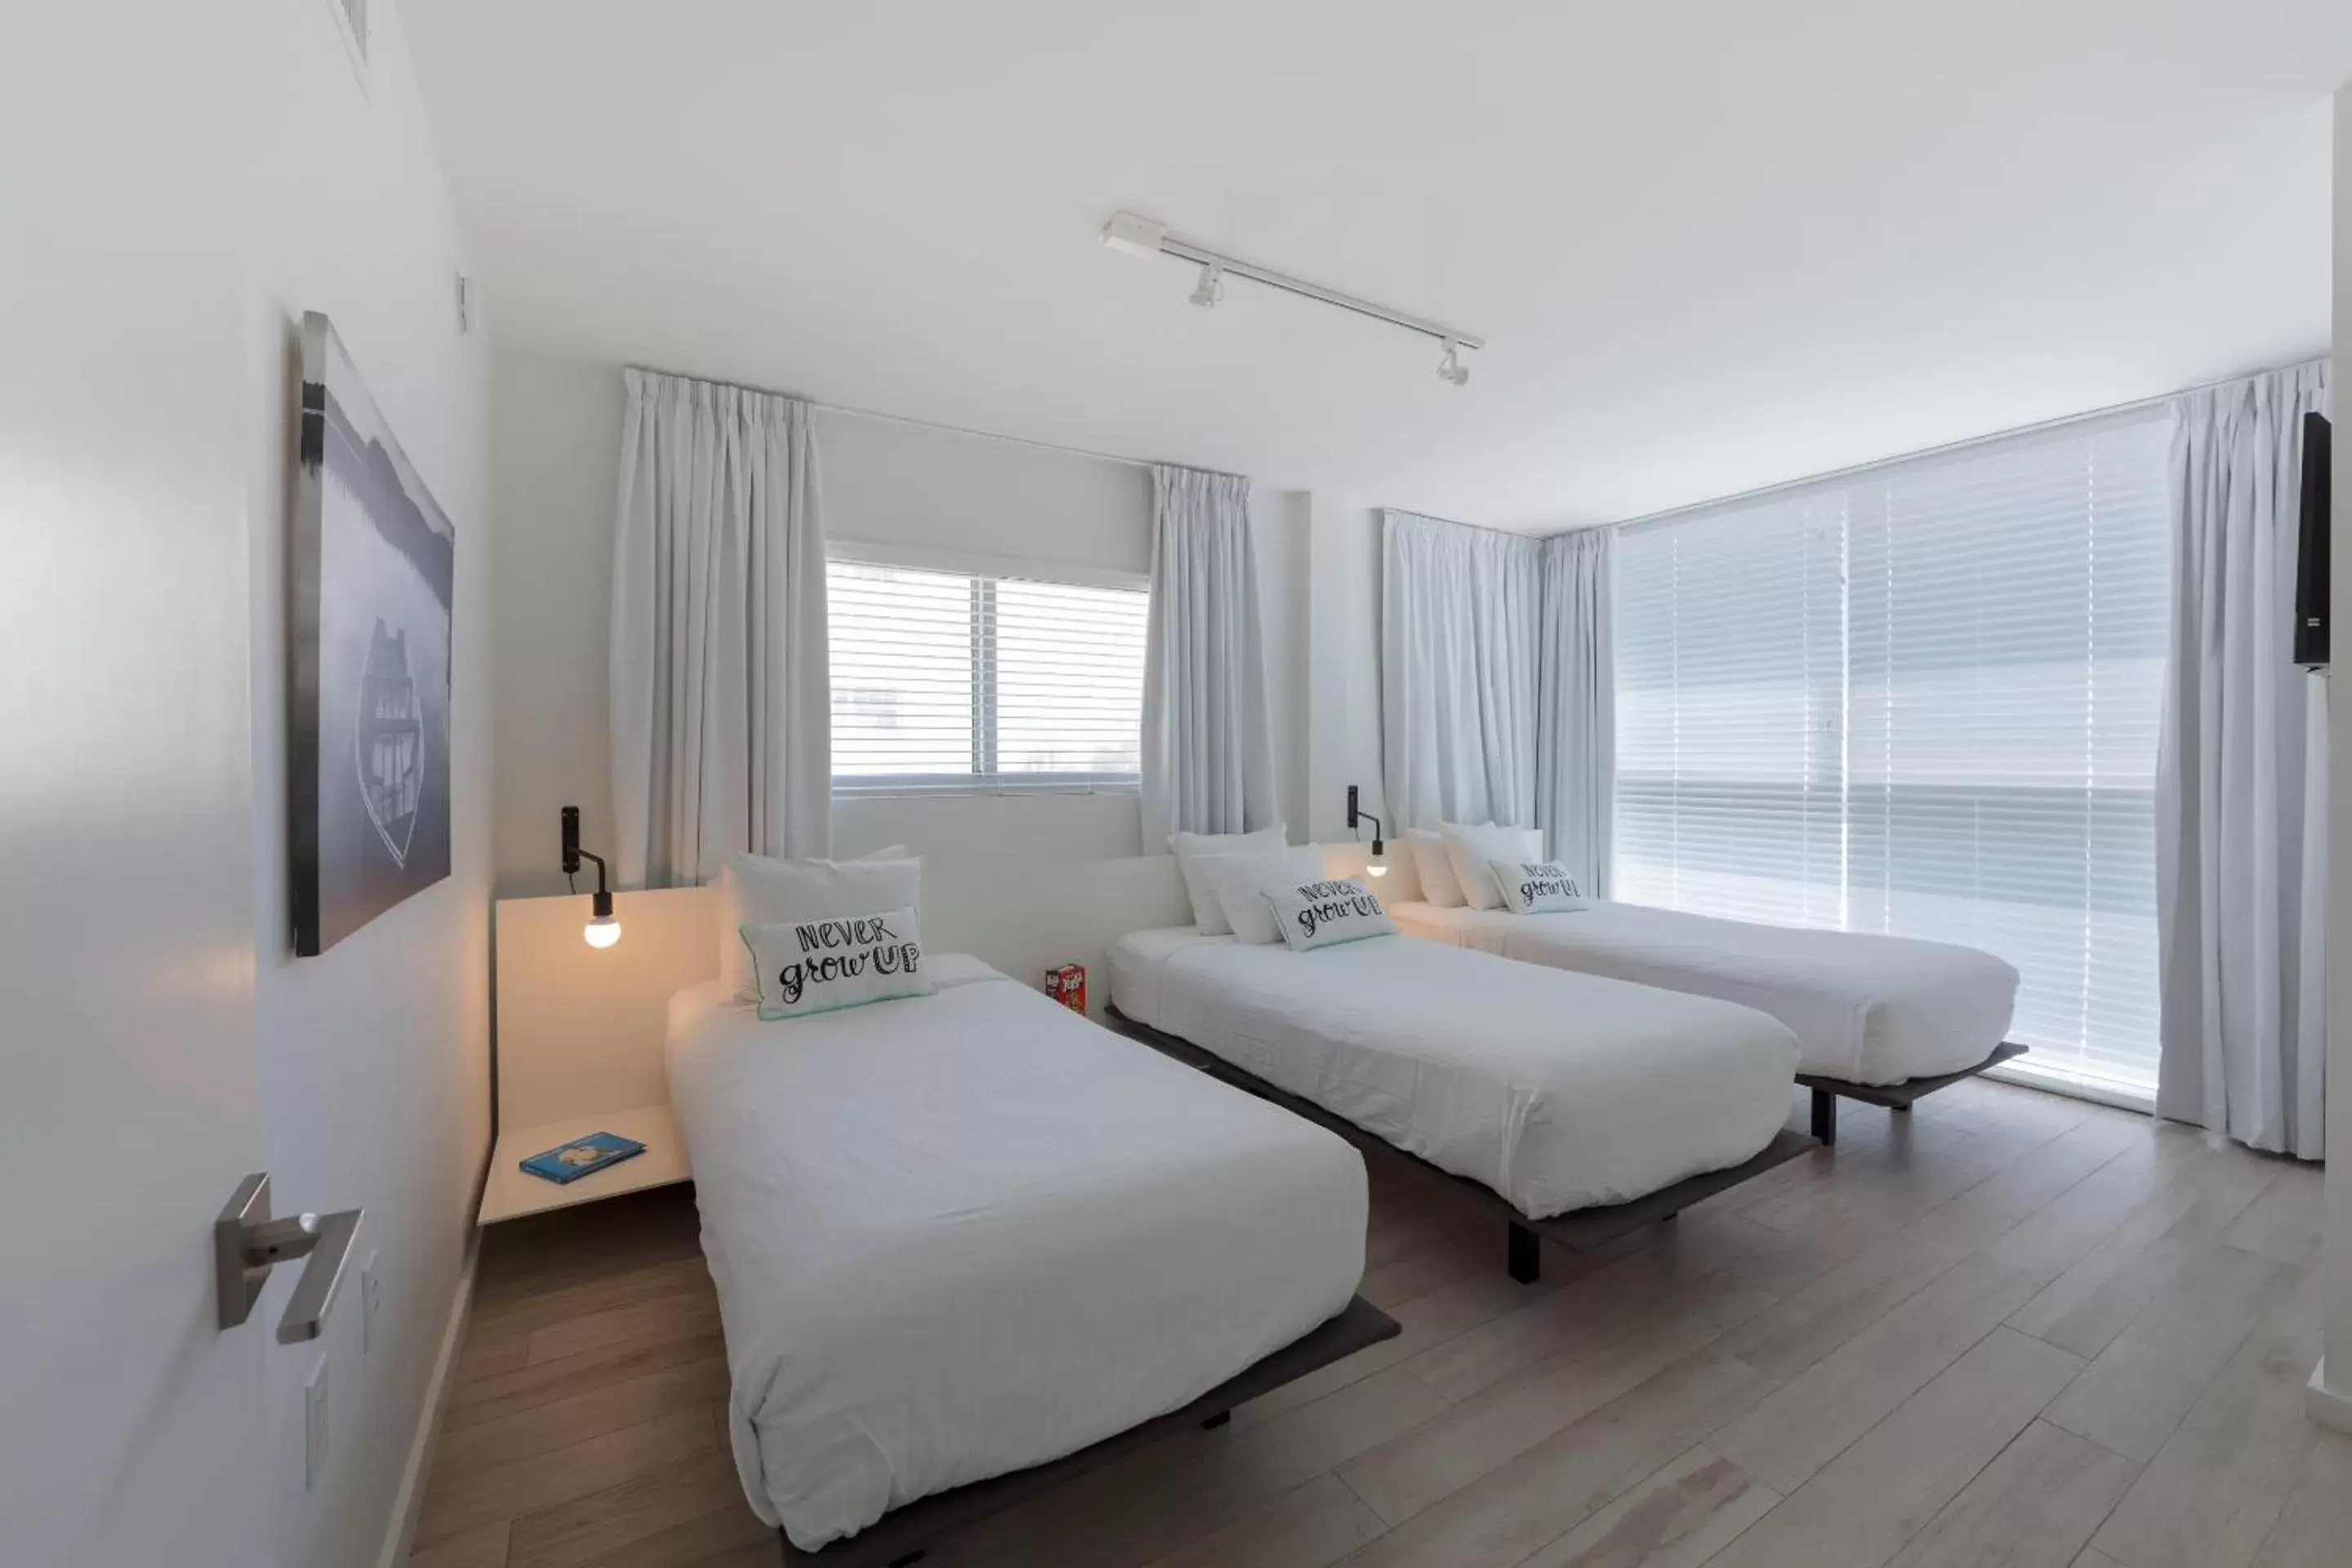 Bedroom in Beach Haus Key Biscayne Contemporary Apartments